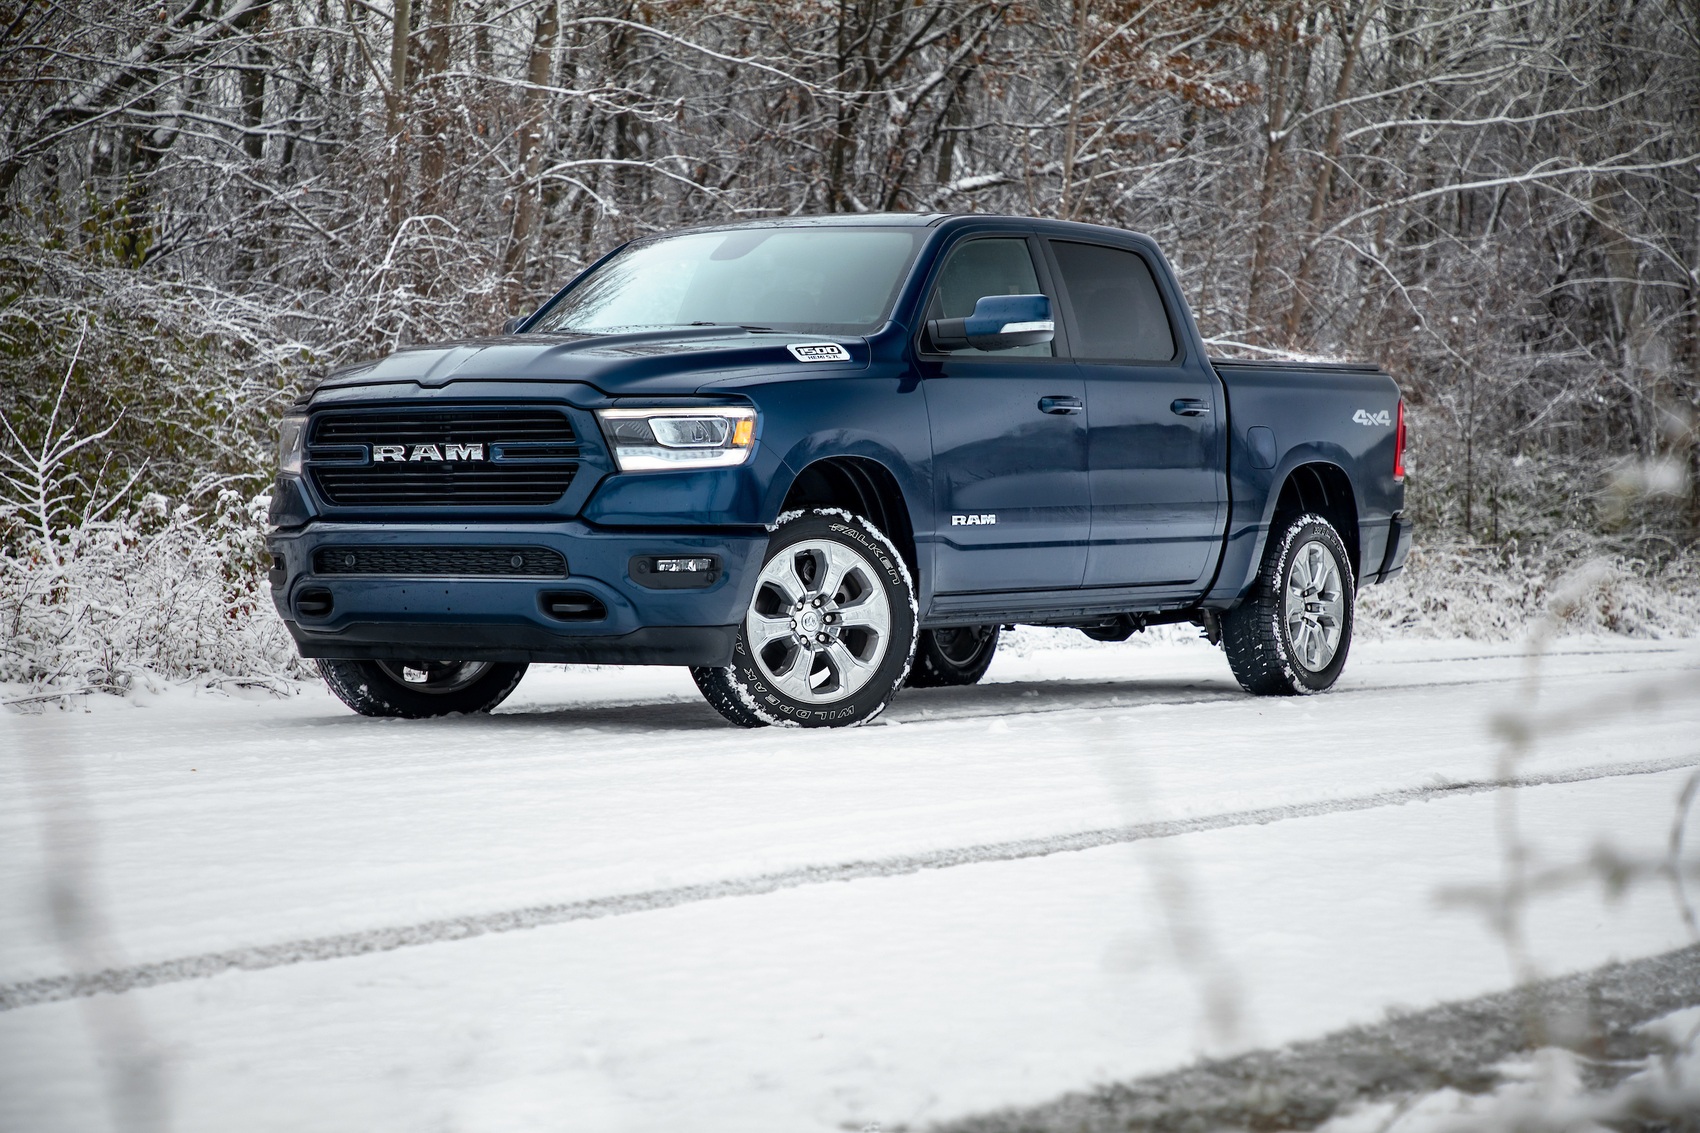 2019 Ram 1500 North Edition. Used vehicle prices up, but bargains are available: here is what the data says.